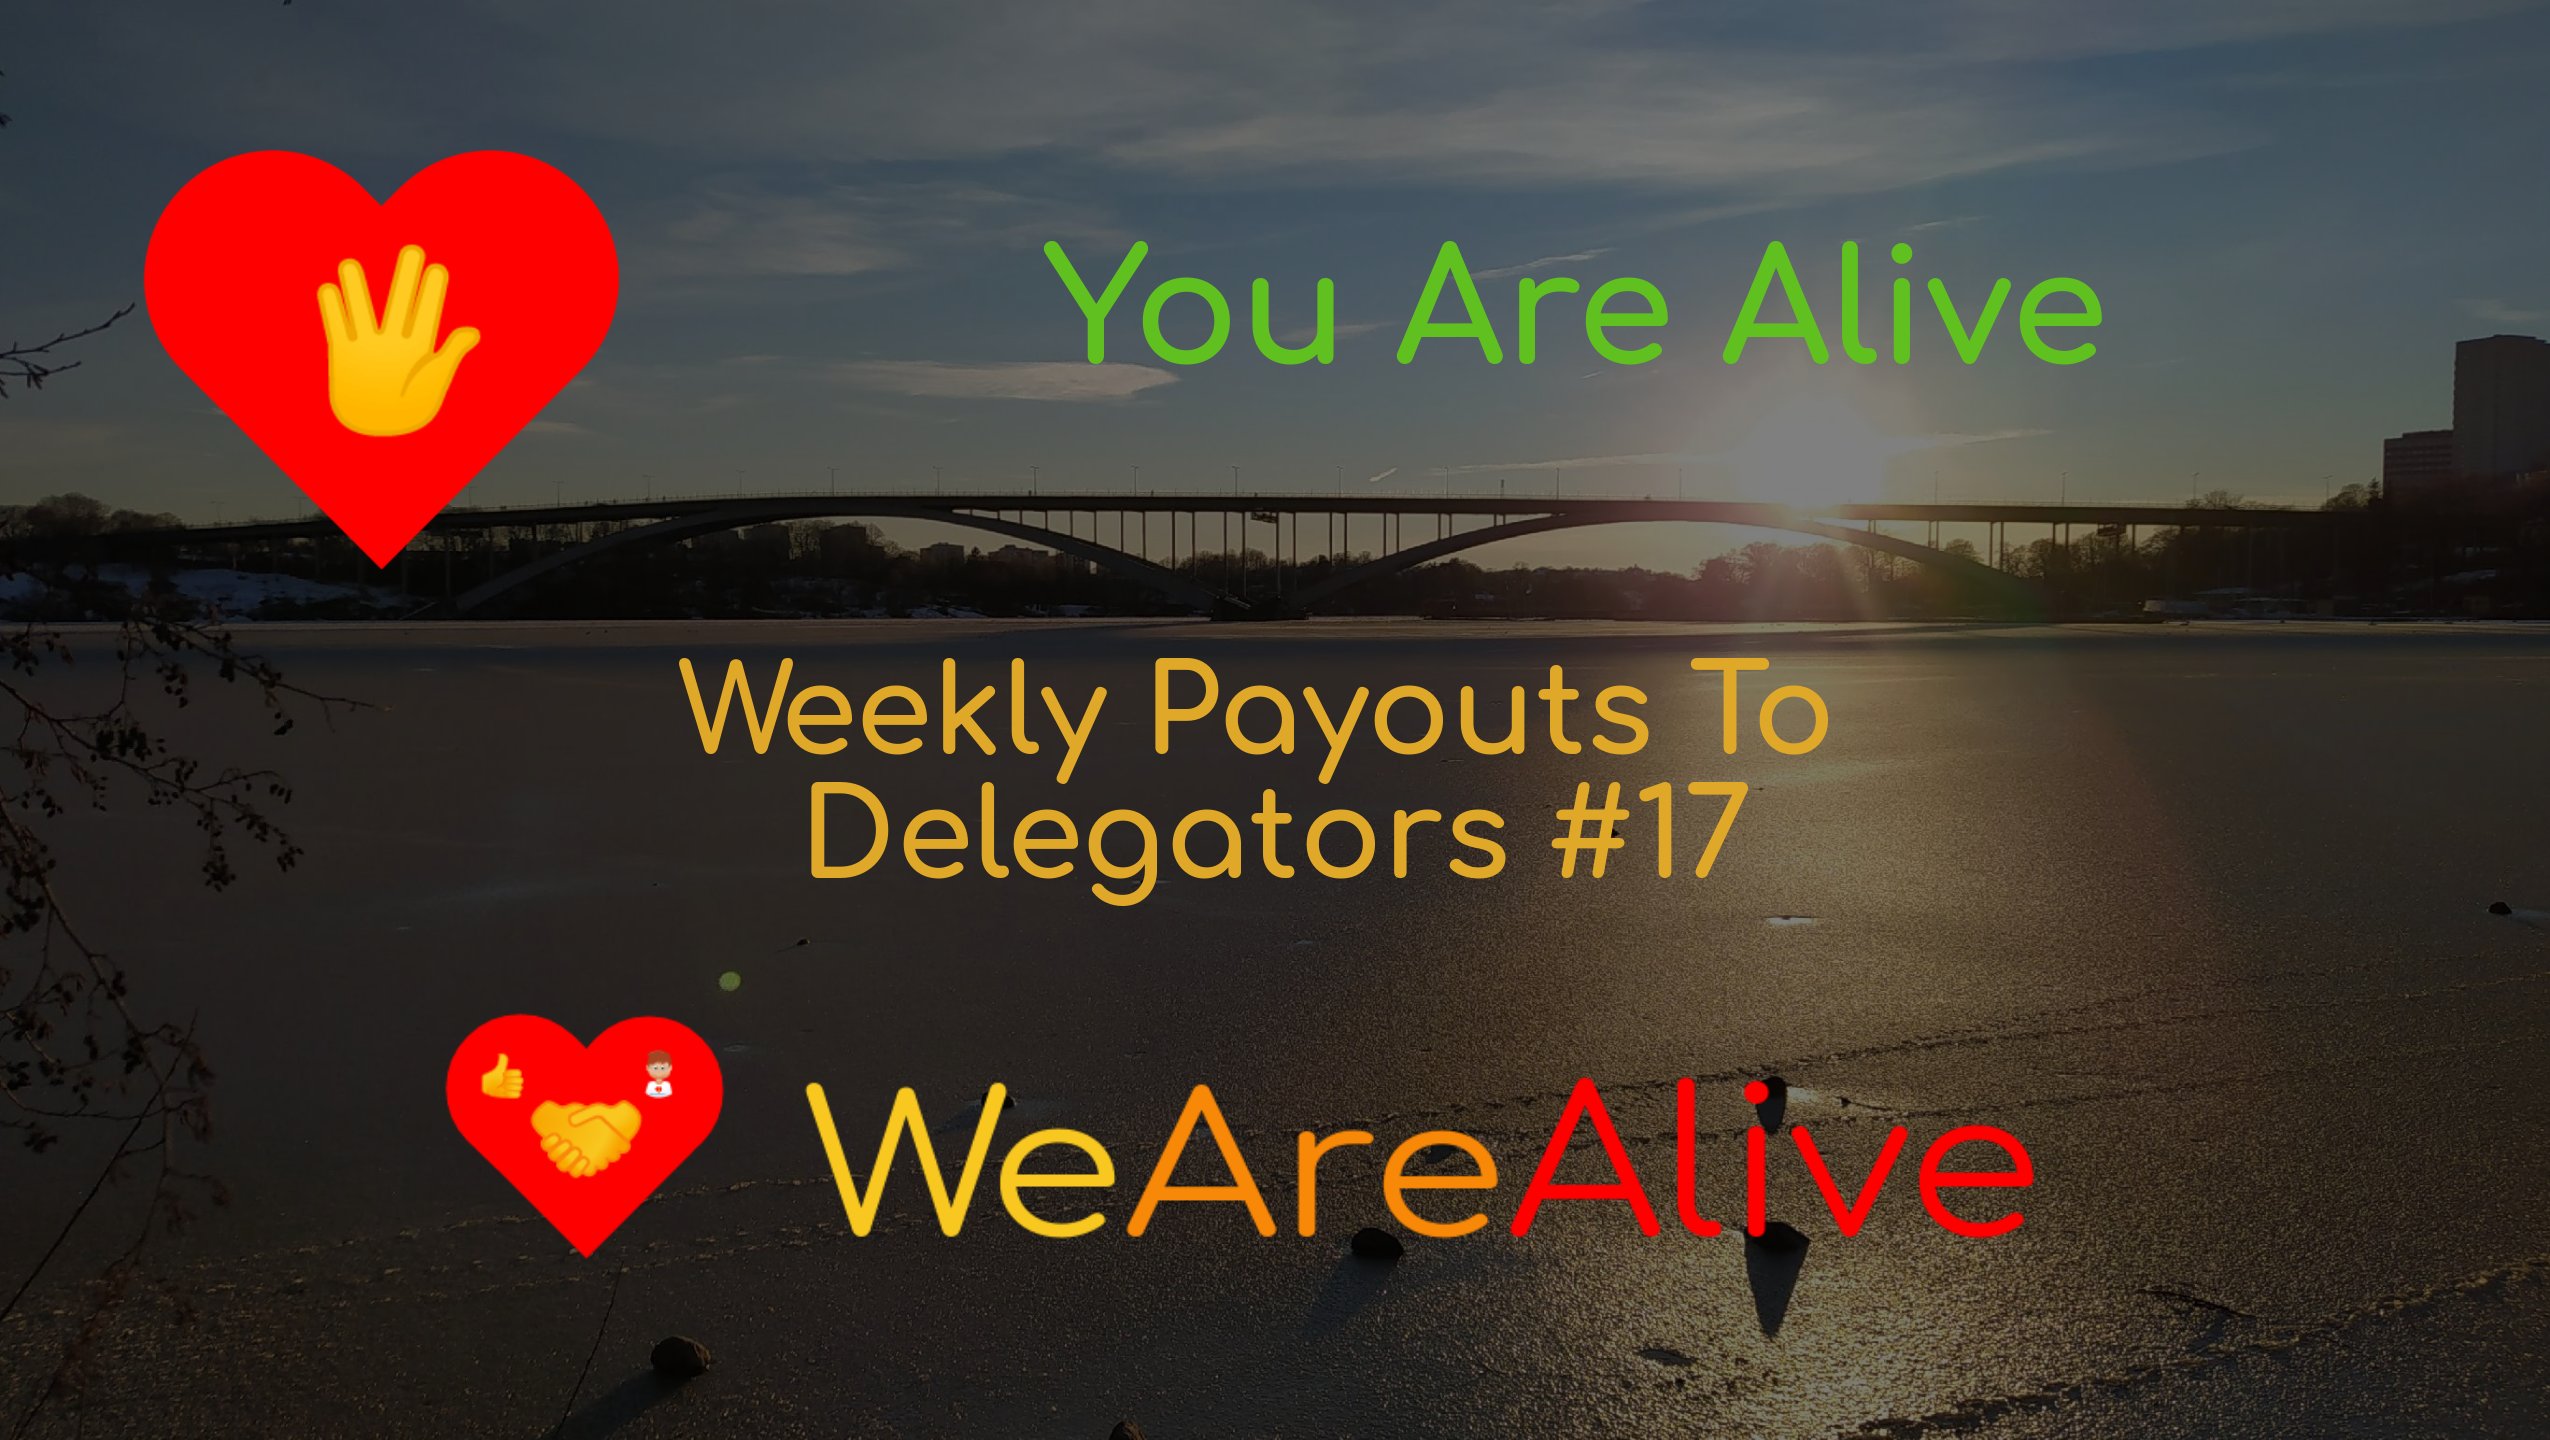 @youarealive/you-are-alive-weekly-payouts-to-delegators-17